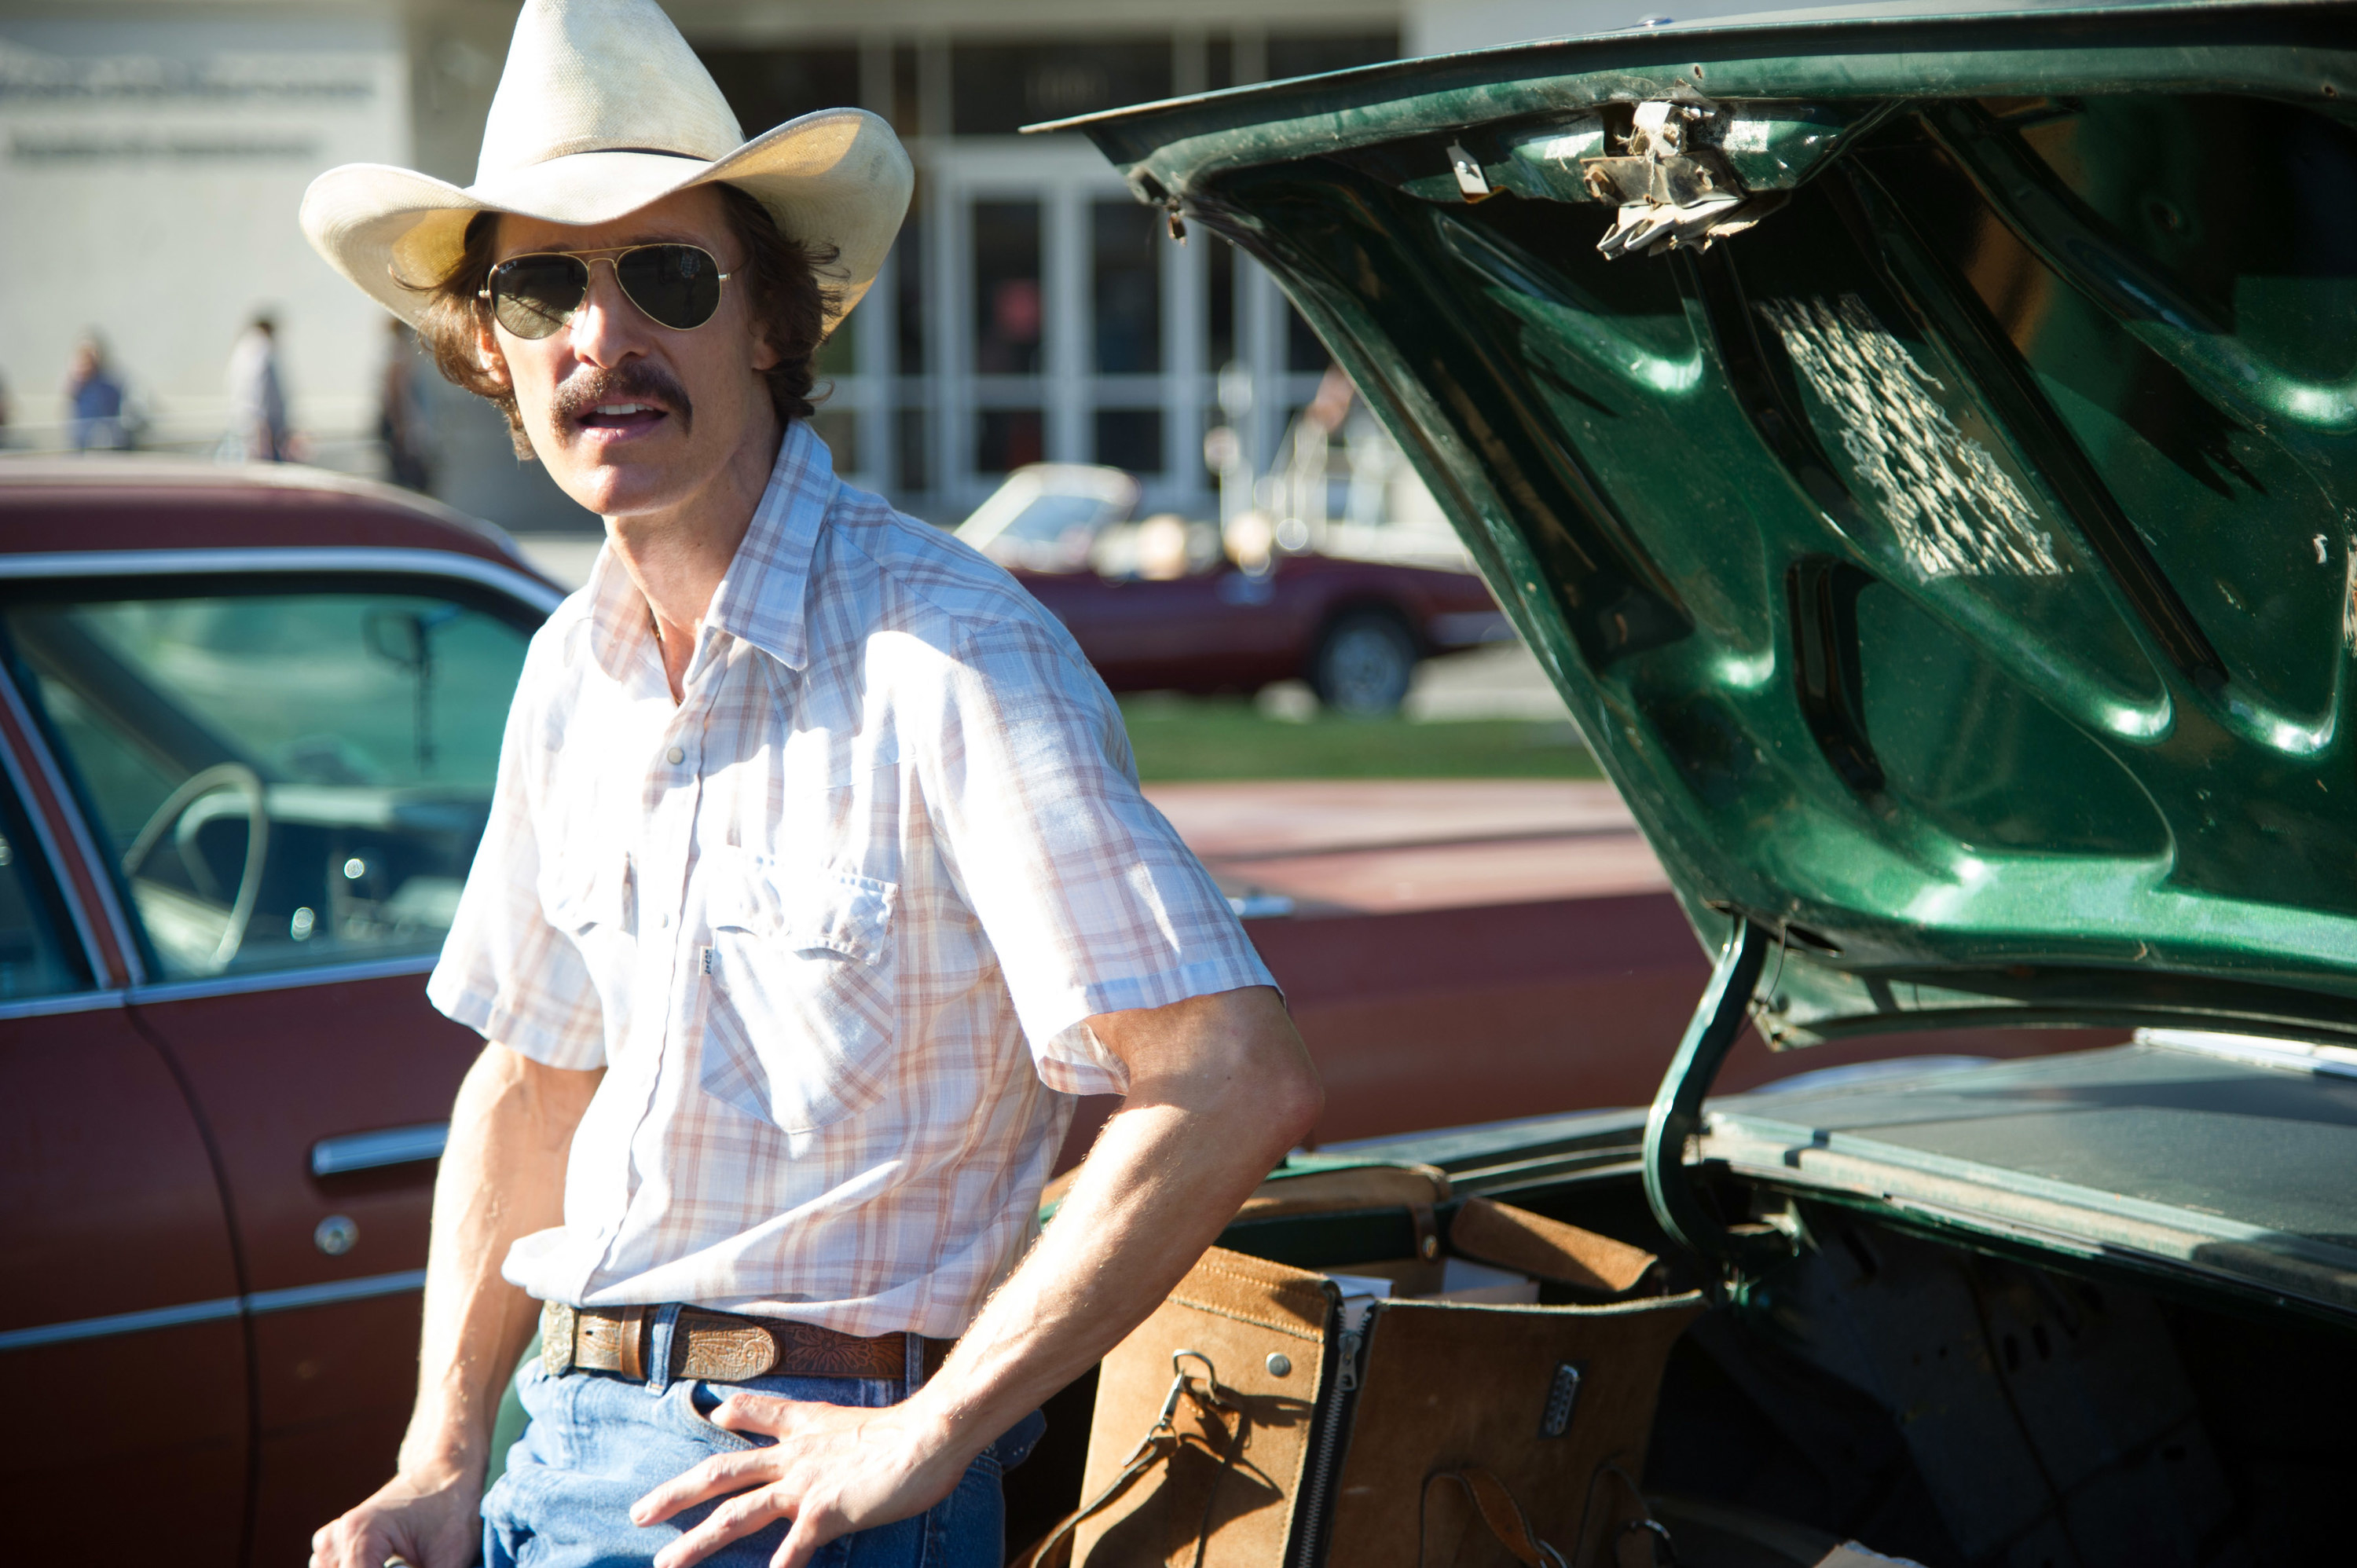 Matthew as Ron wearing a cowboy hat and leaning against a car with his hand on his hip